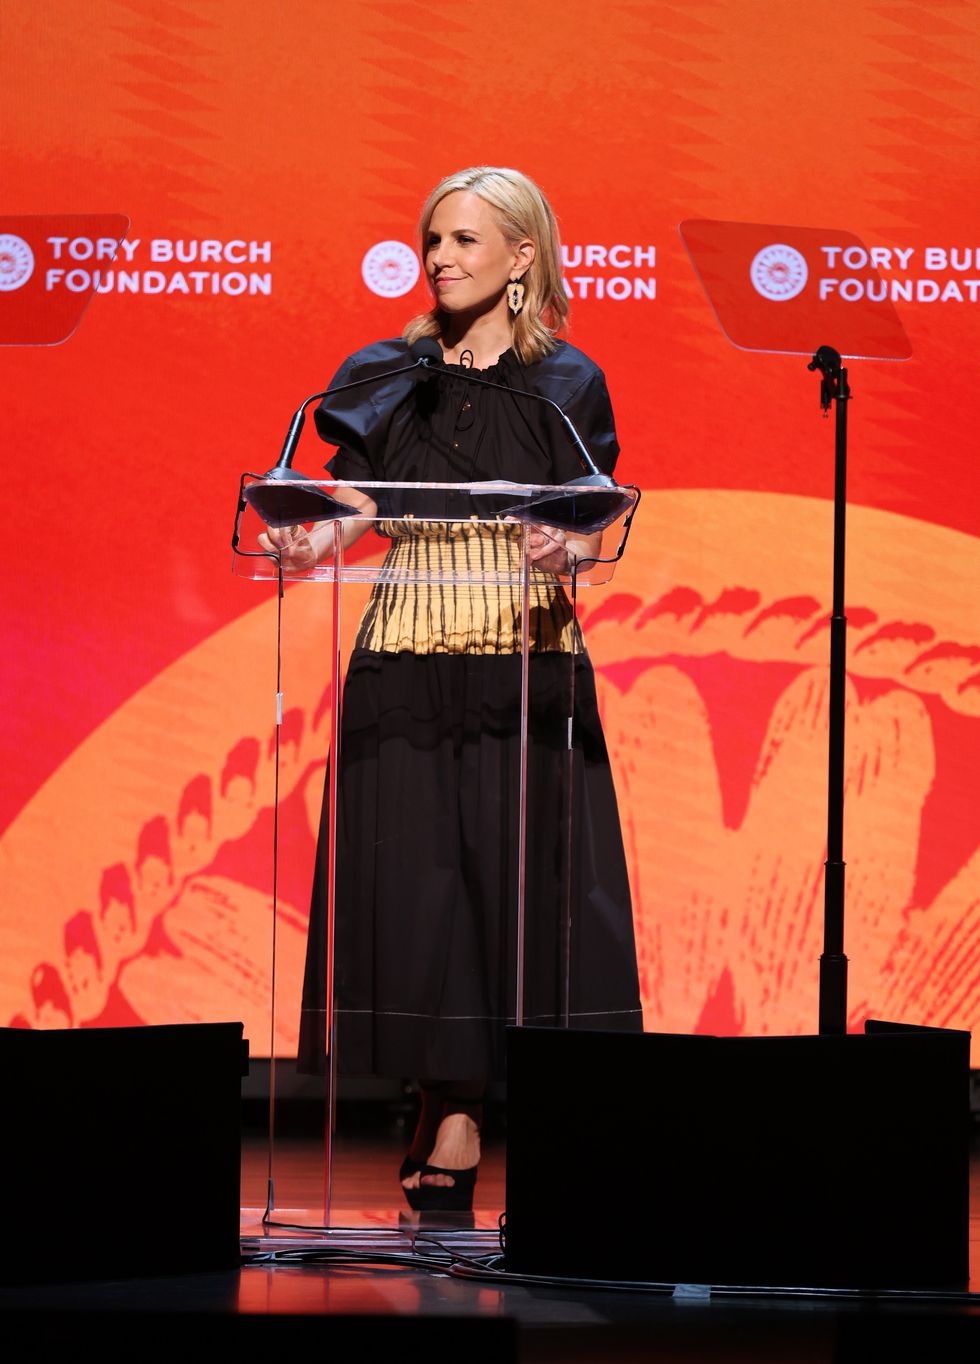 tory burch speaks onstage at the 2022 embrace ambition summit